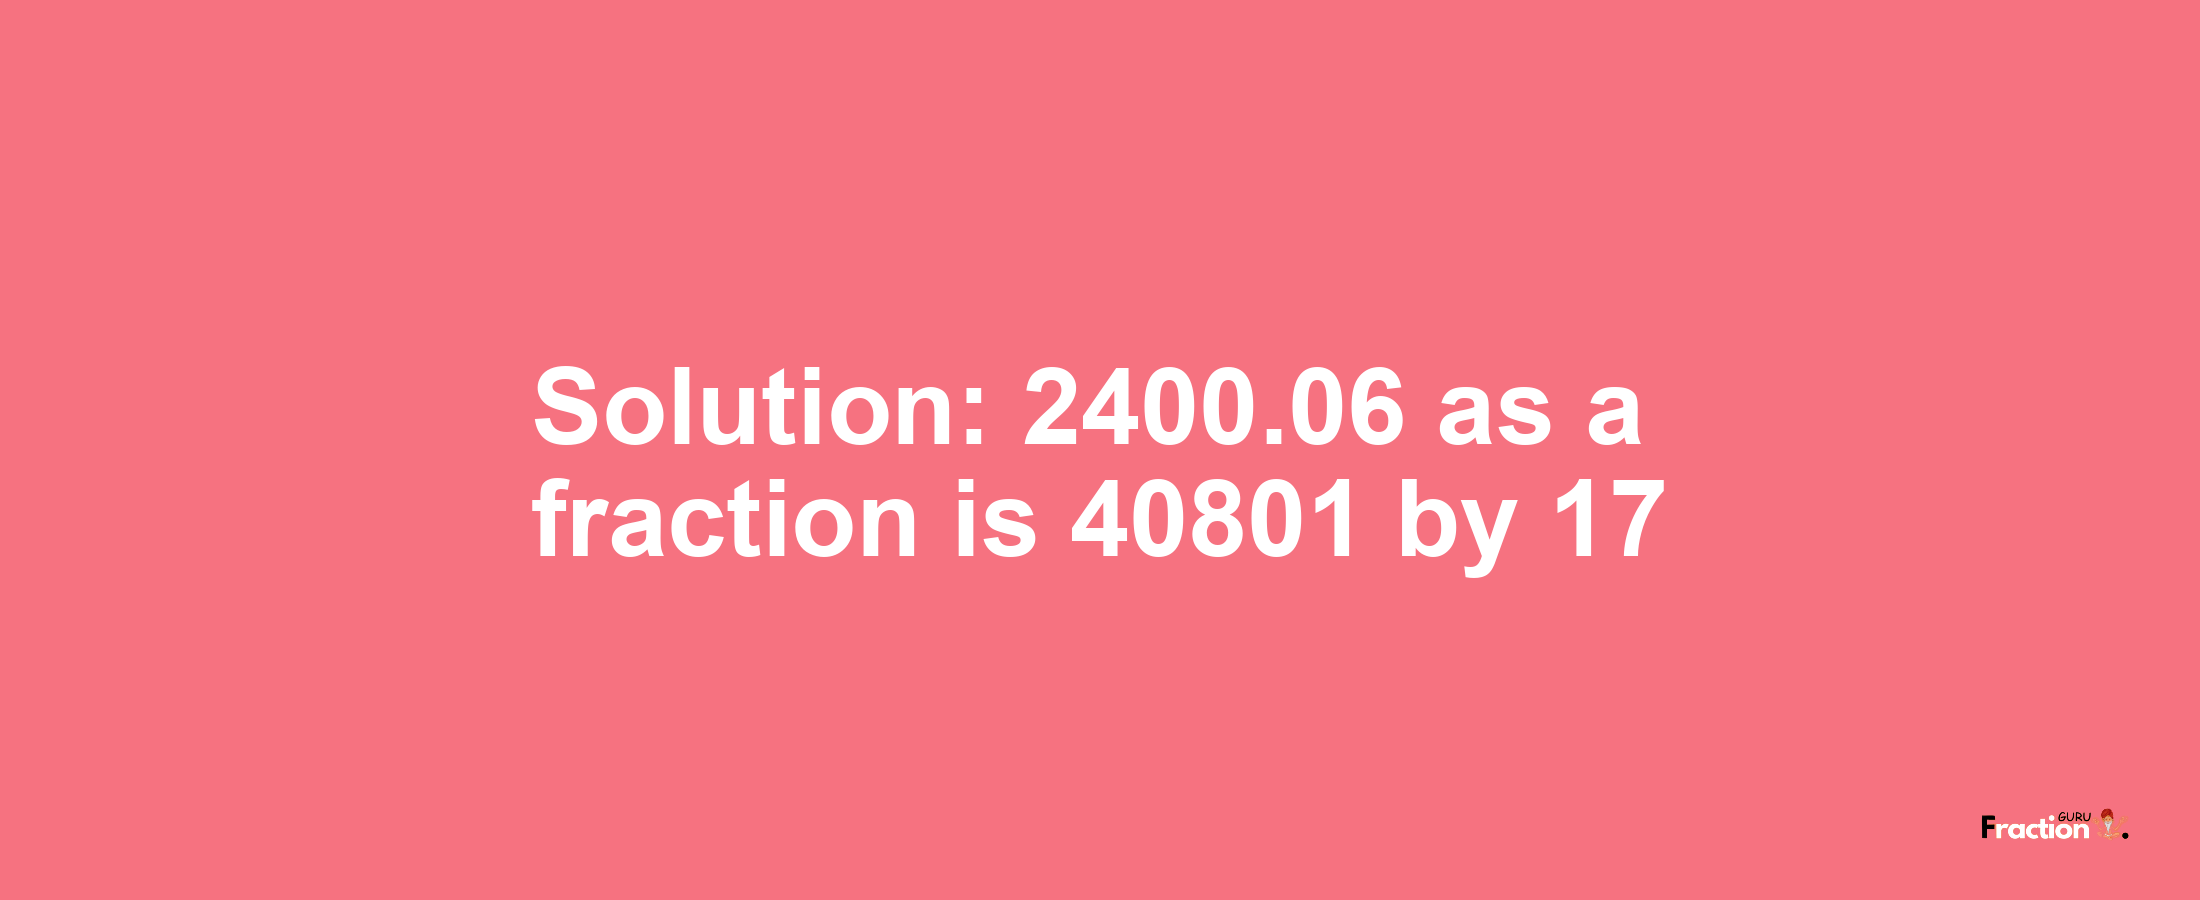 Solution:2400.06 as a fraction is 40801/17